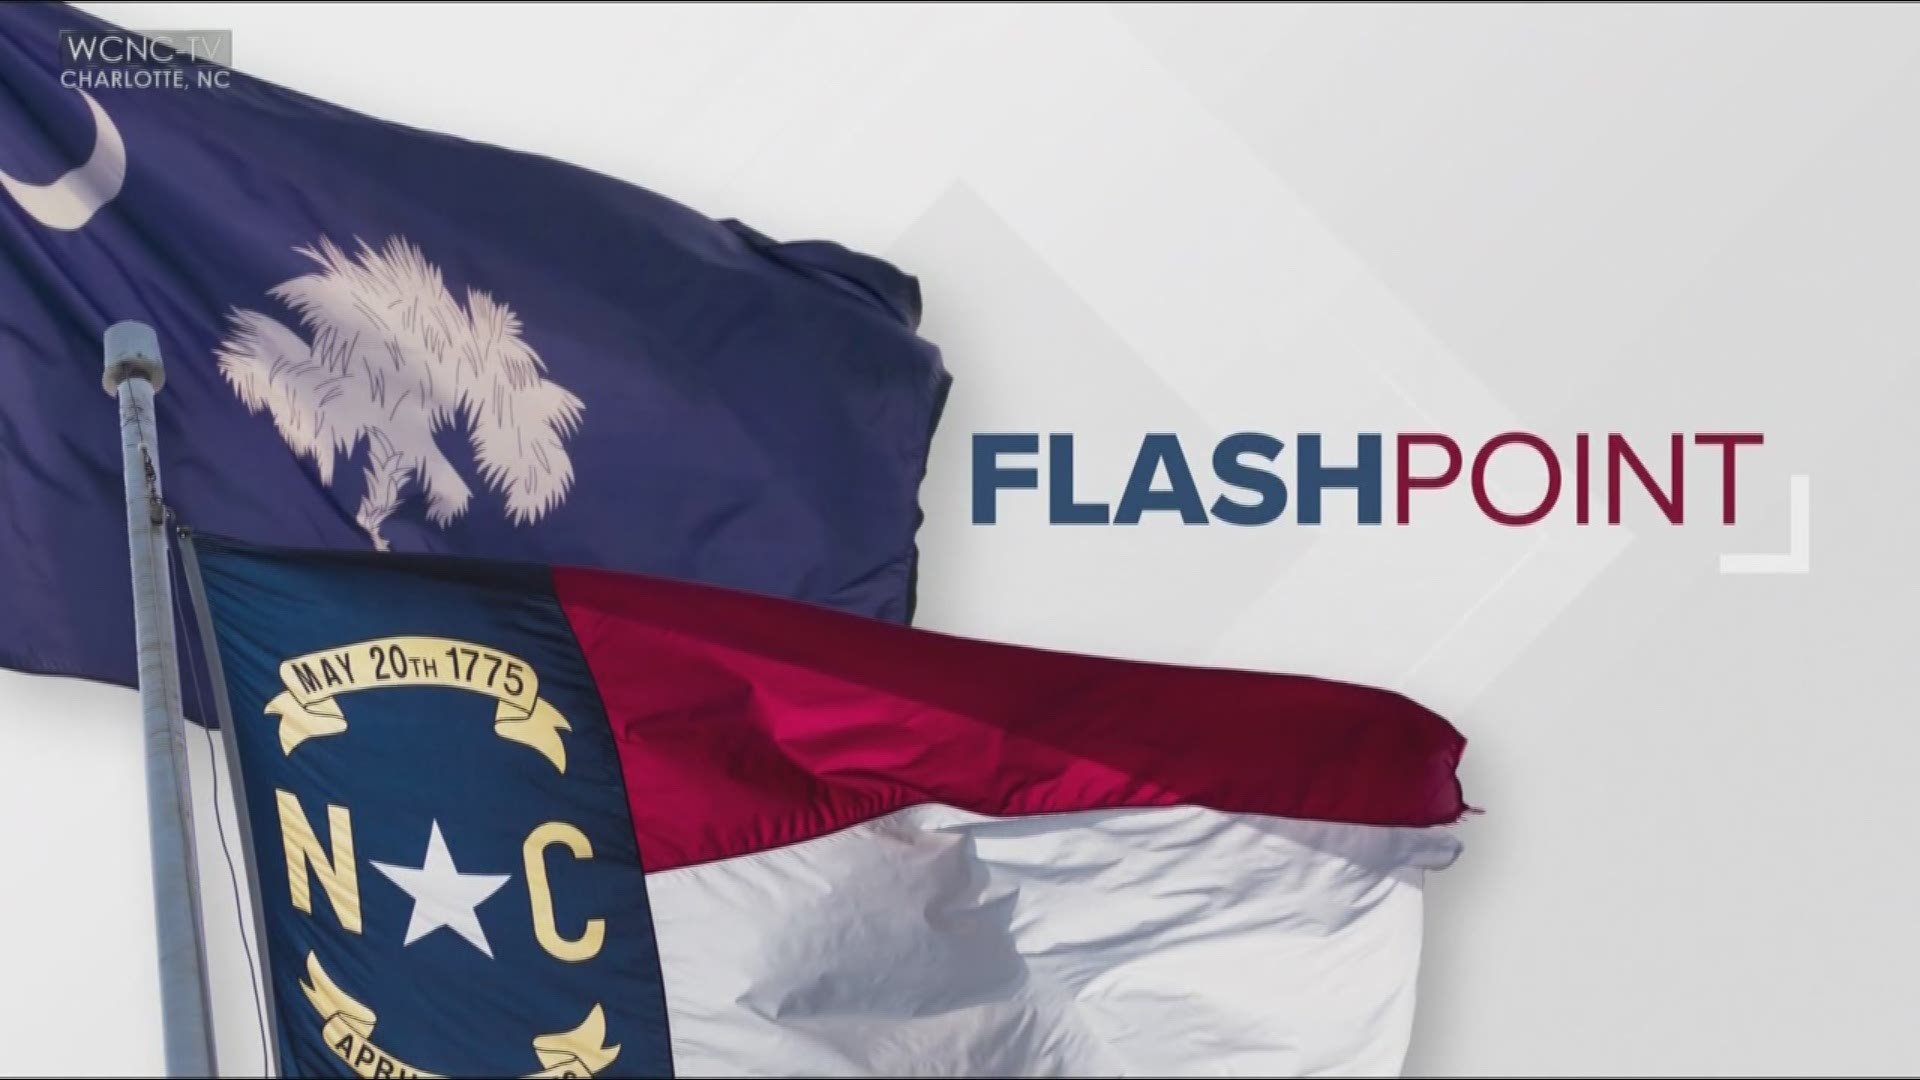 State Rep. Chaz Beasley and State Rep. Dean Arp join Bill McGinty to discuss the devastation brought on by Hurricane Florence, the aftermath and what it all means for the Carolinas.